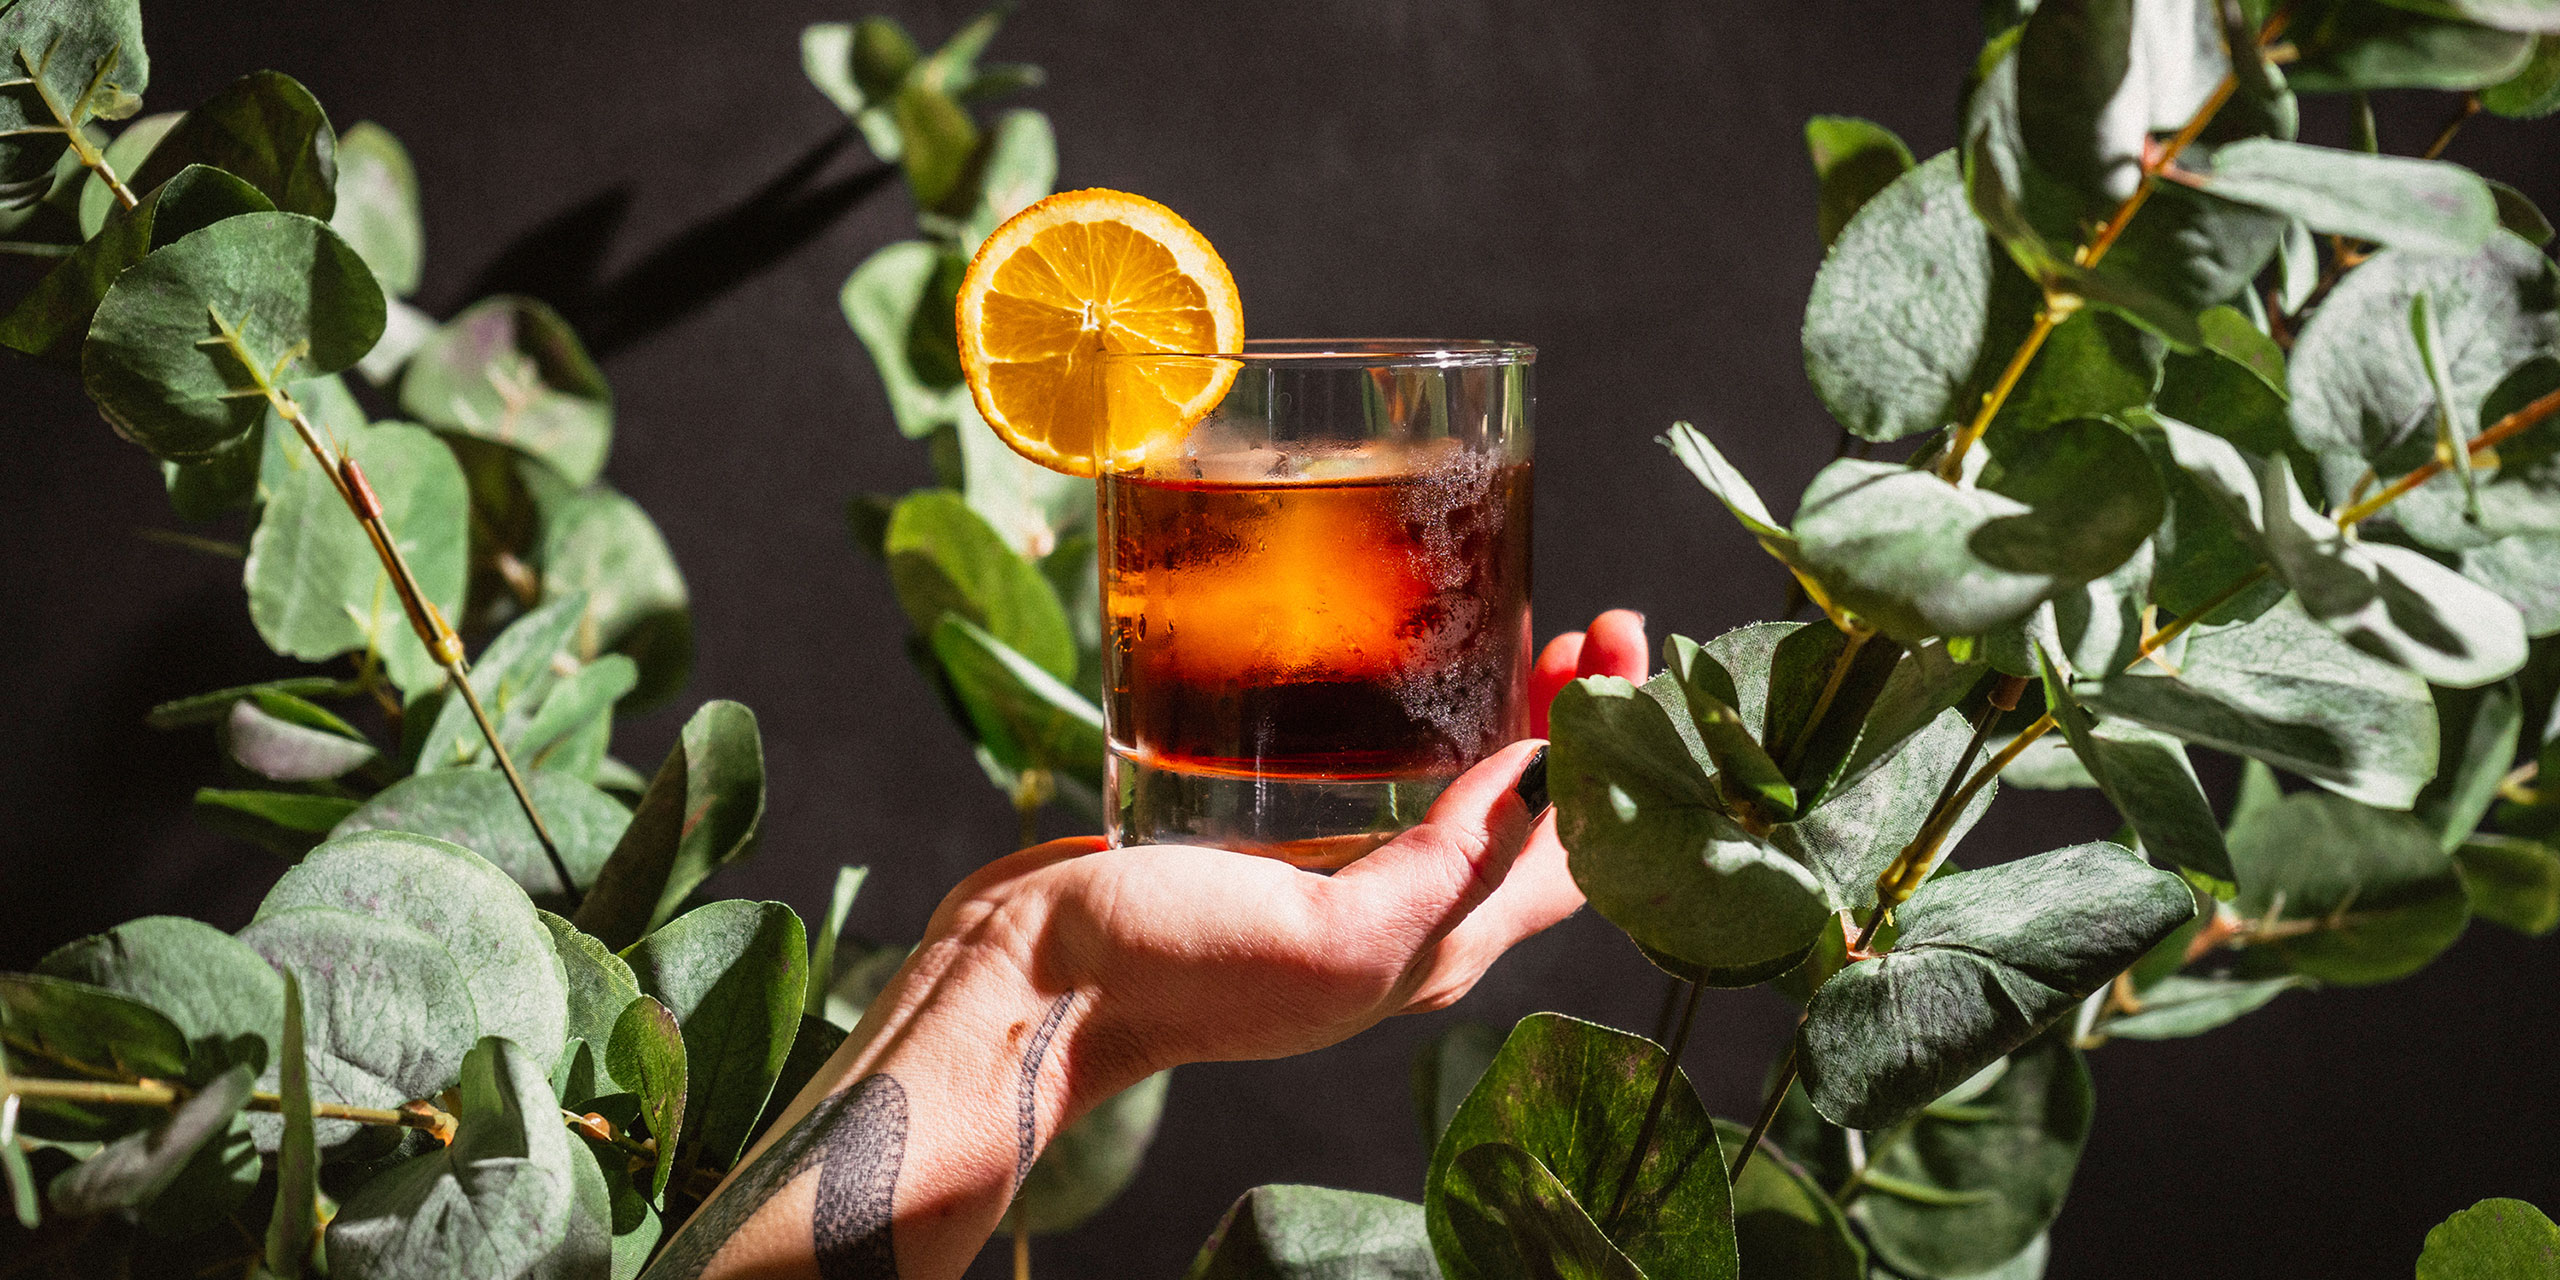 El Vermut vermouth aperitif with an orange wheel, held up by a hand in the middle of greenery